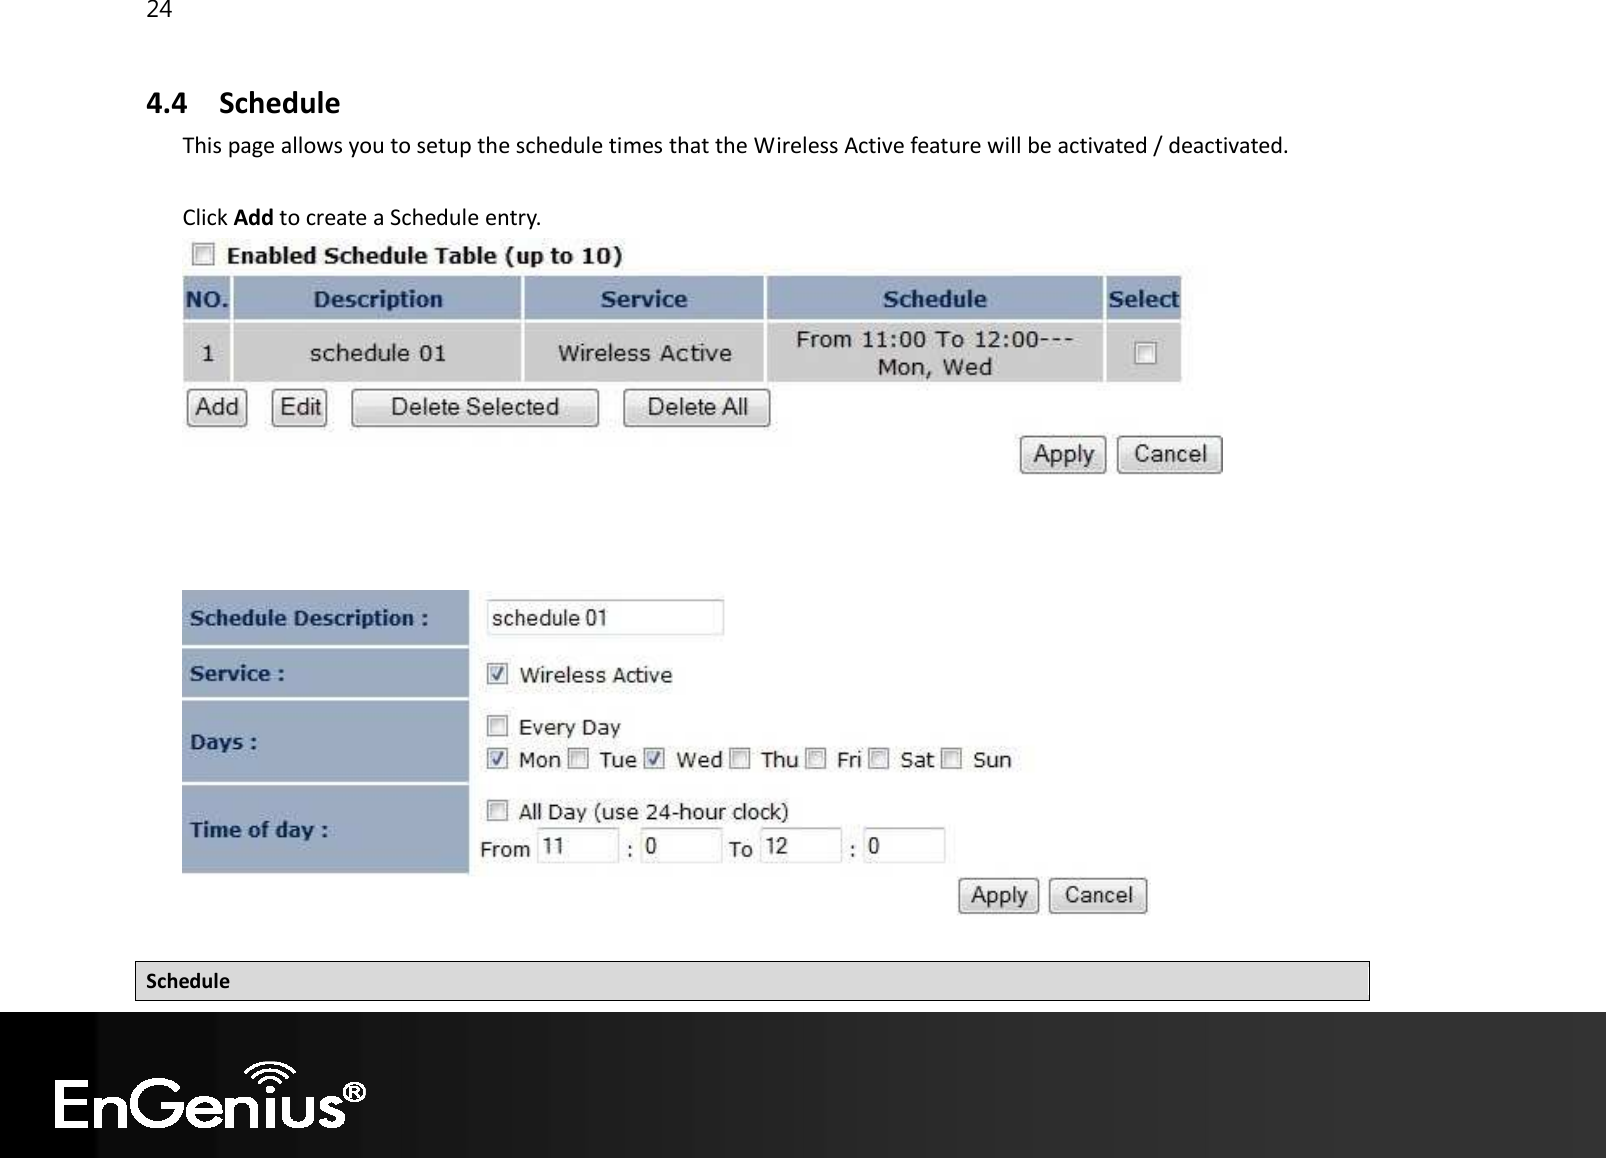 24  4.4 Schedule This page allows you to setup the schedule times that the Wireless Active feature will be activated / deactivated.    Click Add to create a Schedule entry.       Schedule 